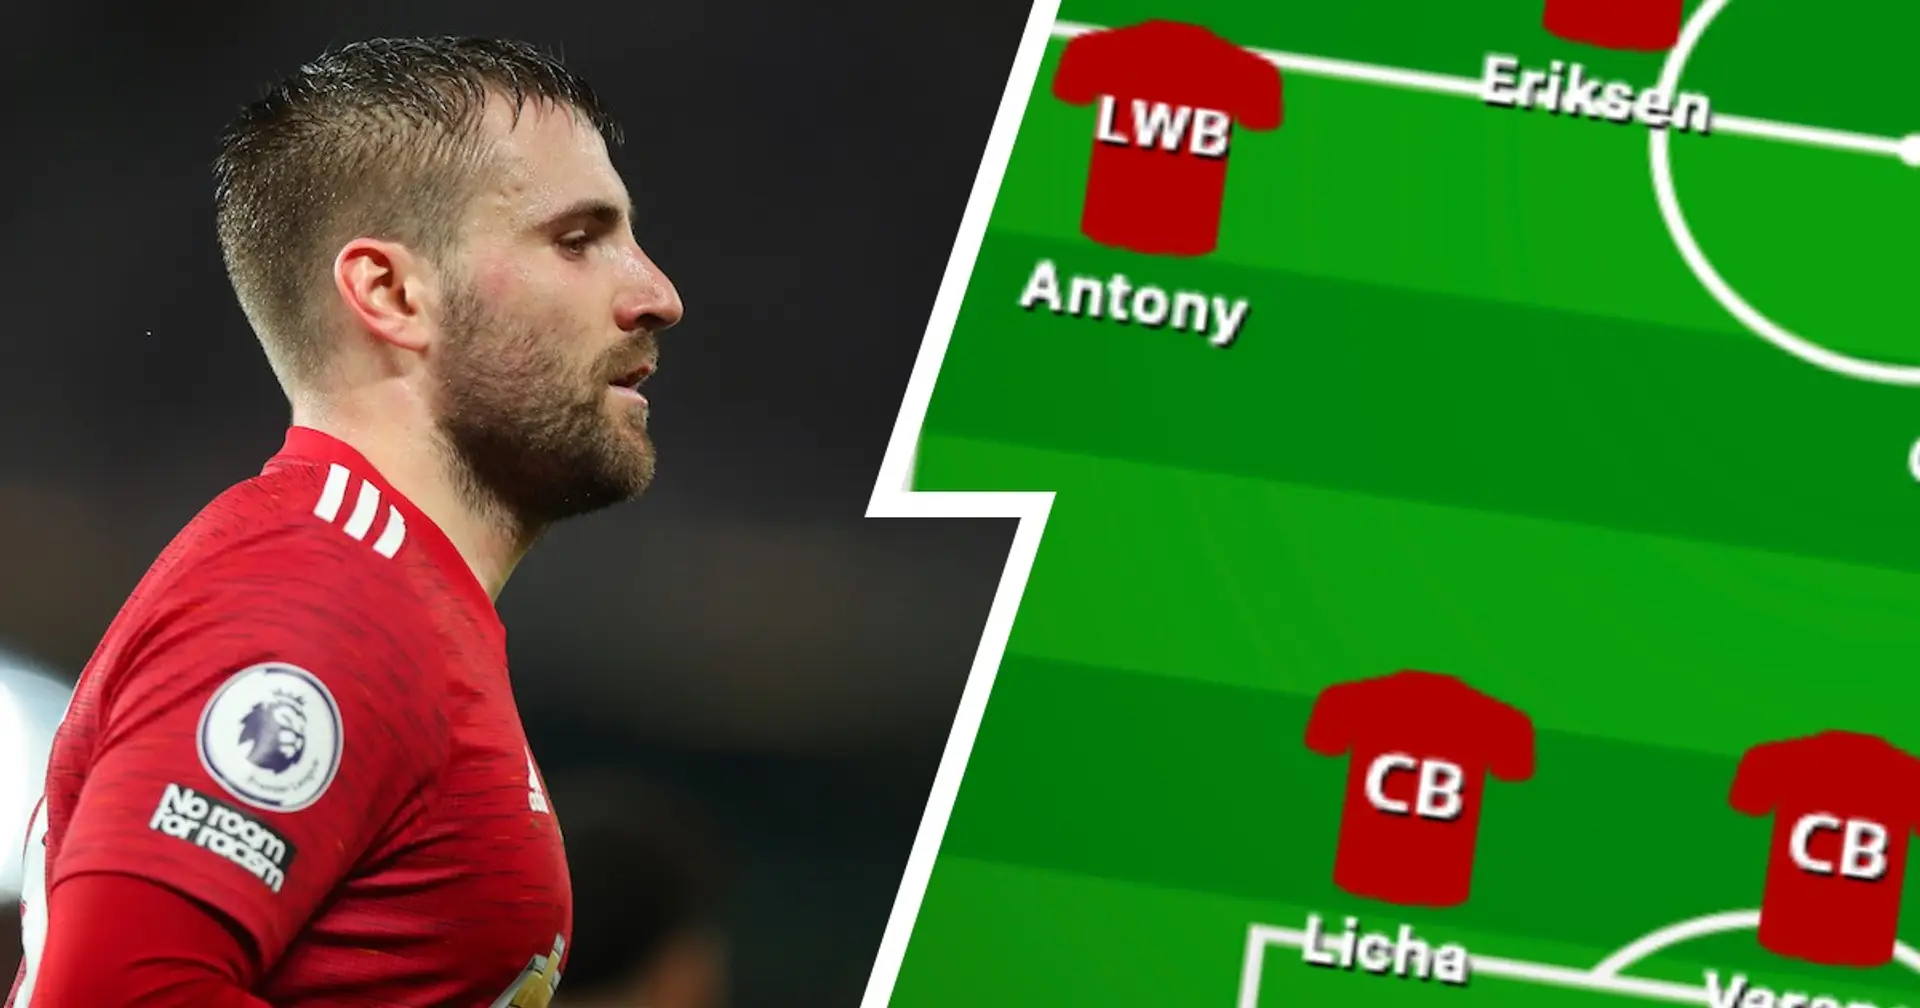 Antony at LWB & 2 other ways Man United can solve Shaw injury crisis - shown in pics